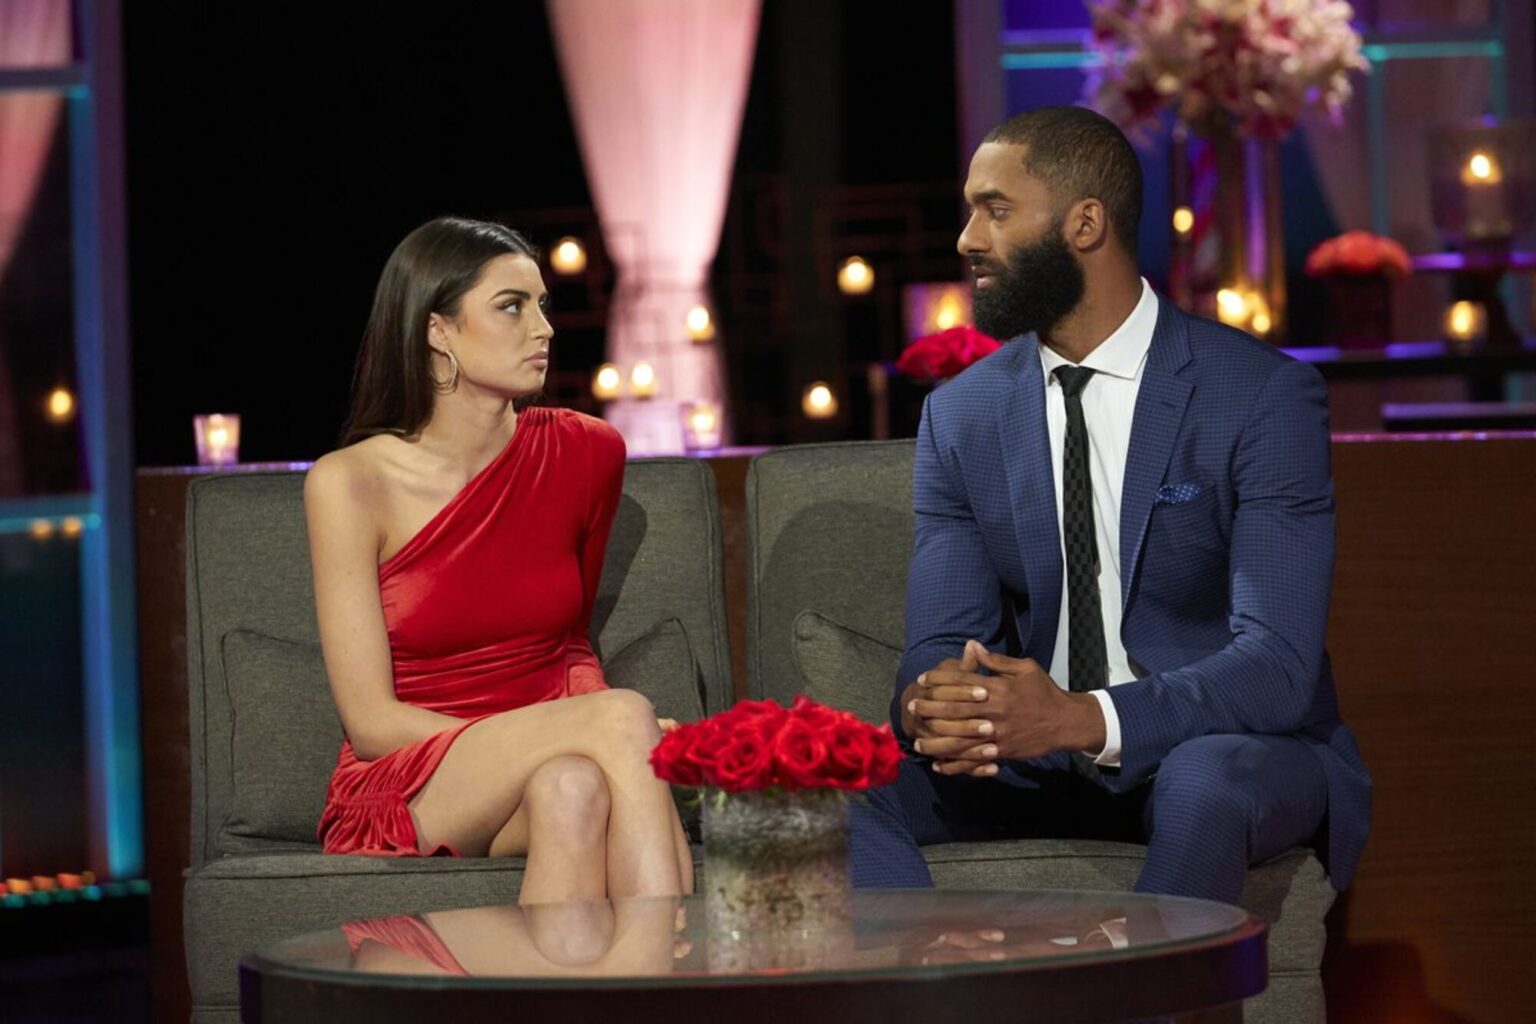 The latest season of 'The Bachelor' on ABC has finally ended, but not without some tense controversy. Hear about the issues of racism in the show here.